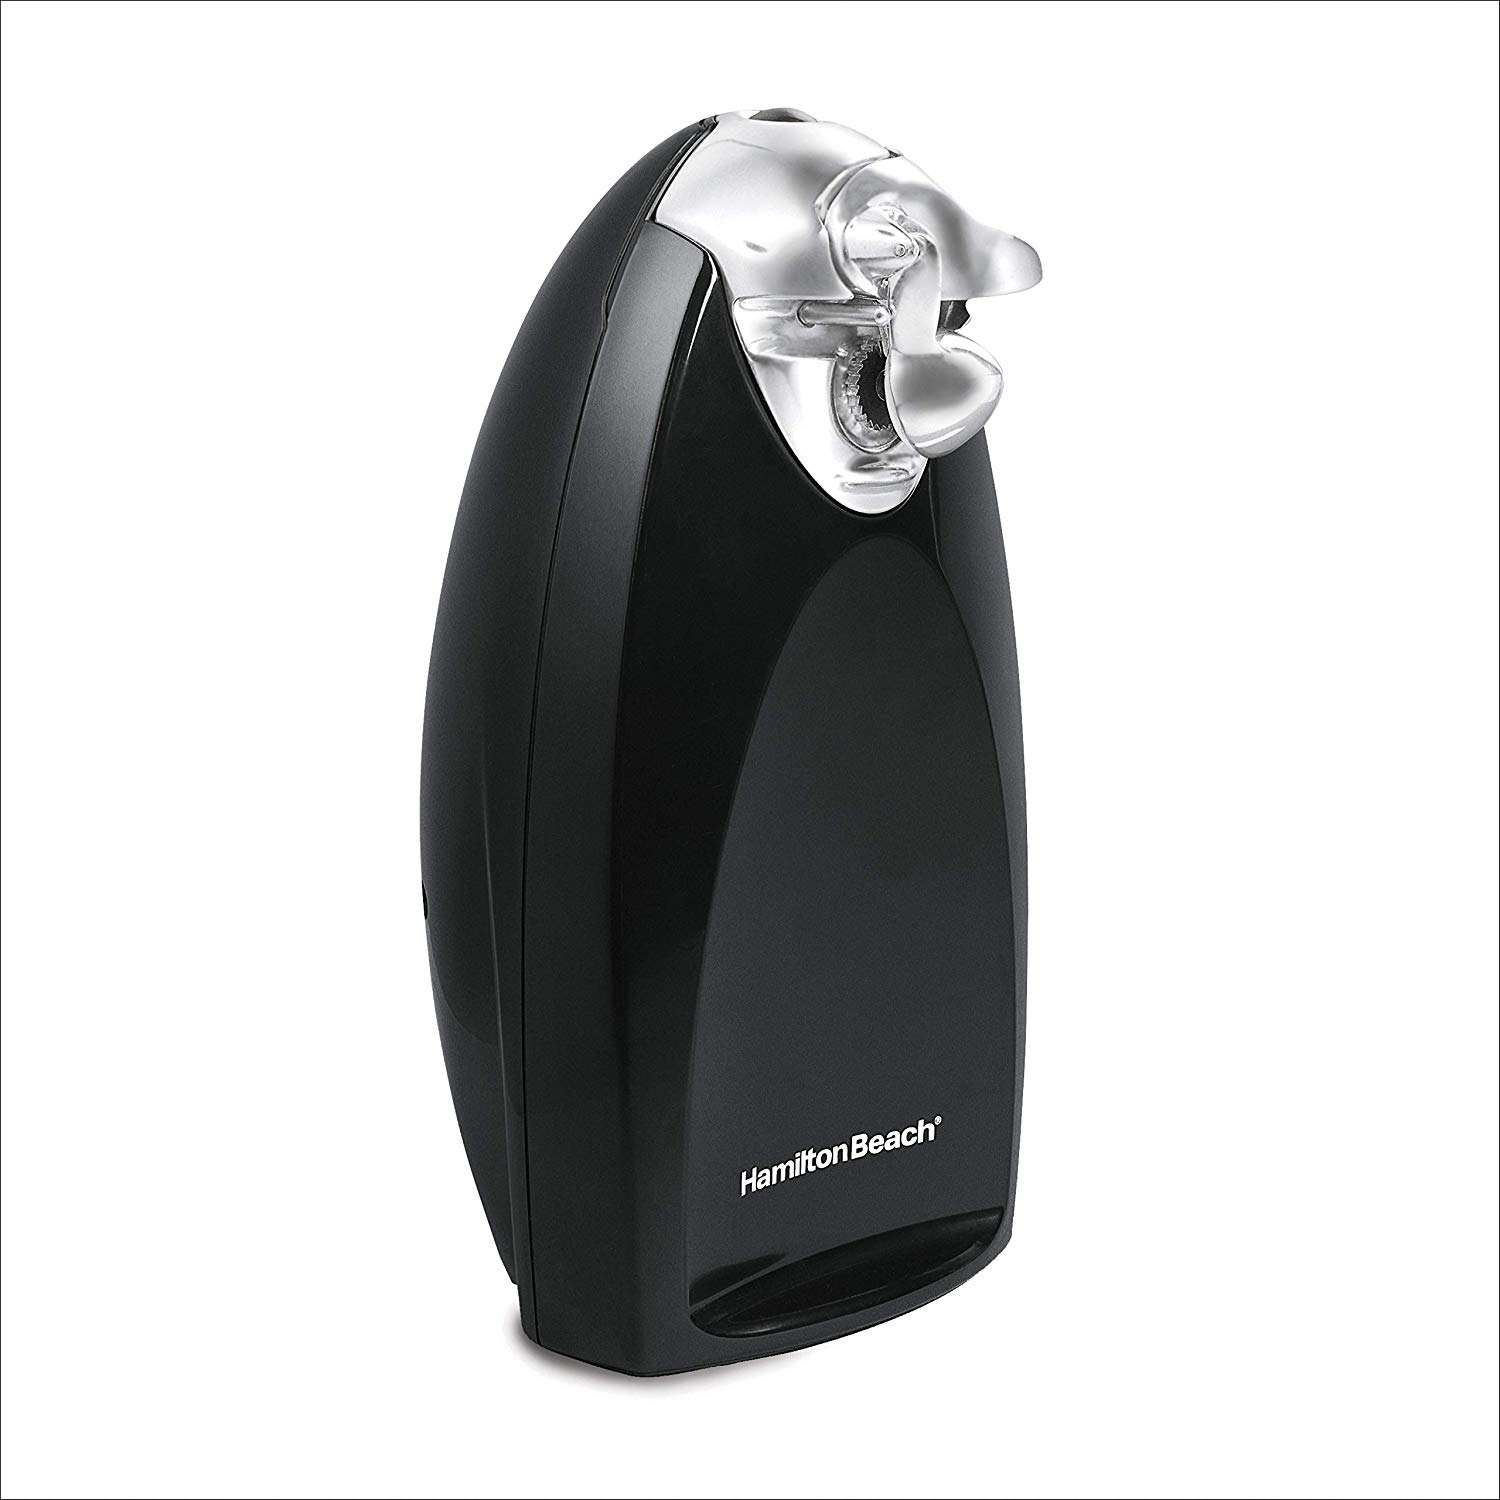 https://www.dontwasteyourmoney.com/wp-content/uploads/2020/02/hamilton-beach-electric-automatic-can-opener-electric-can-opener-1.jpg